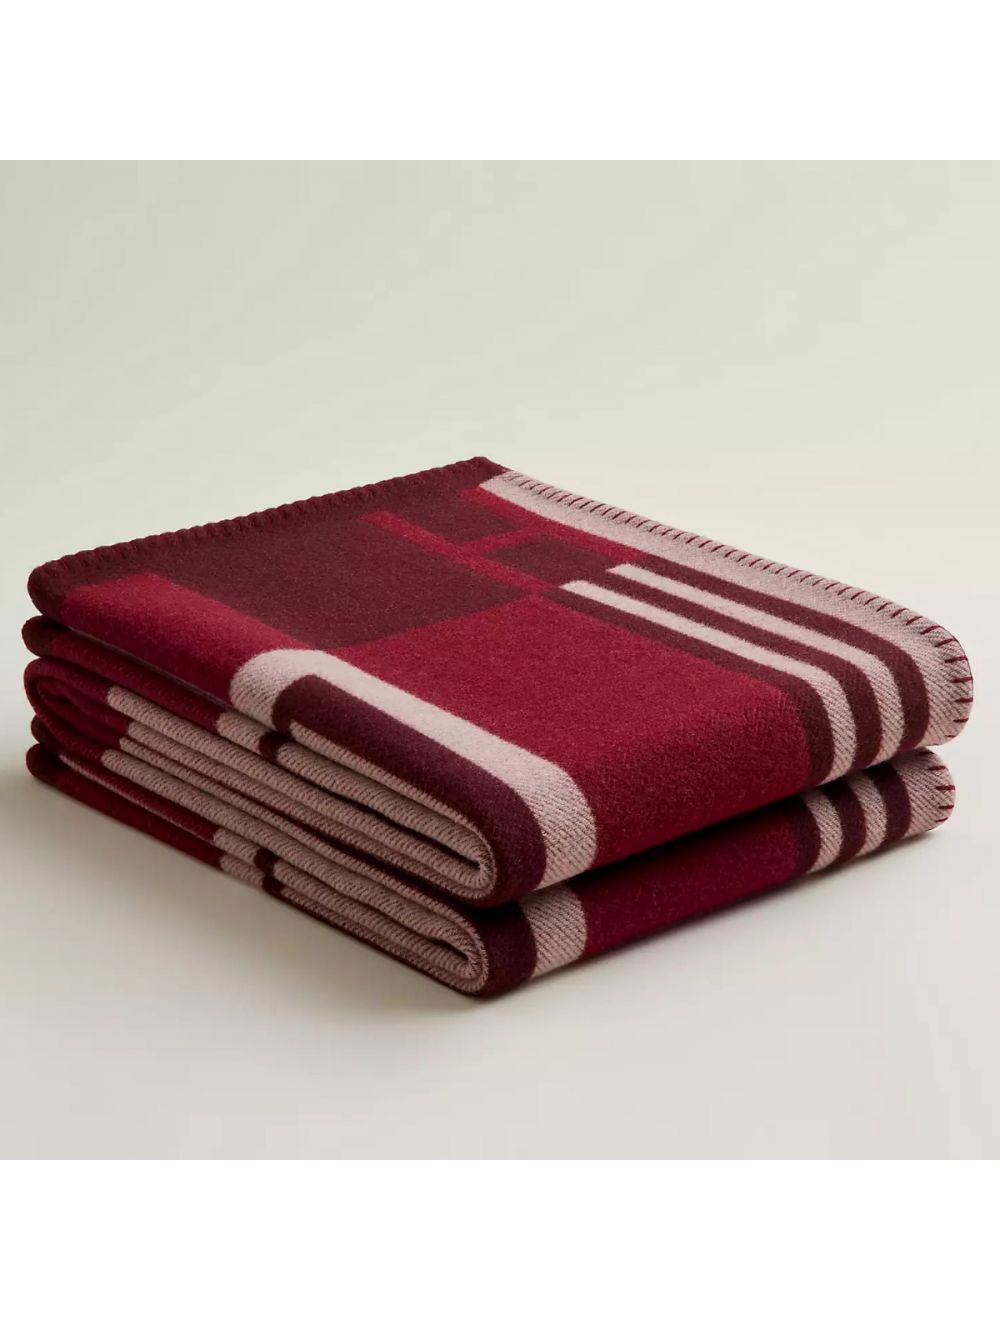 Replica Hermes Ithaque Blanket in Bordeaux Wool and Cashmere